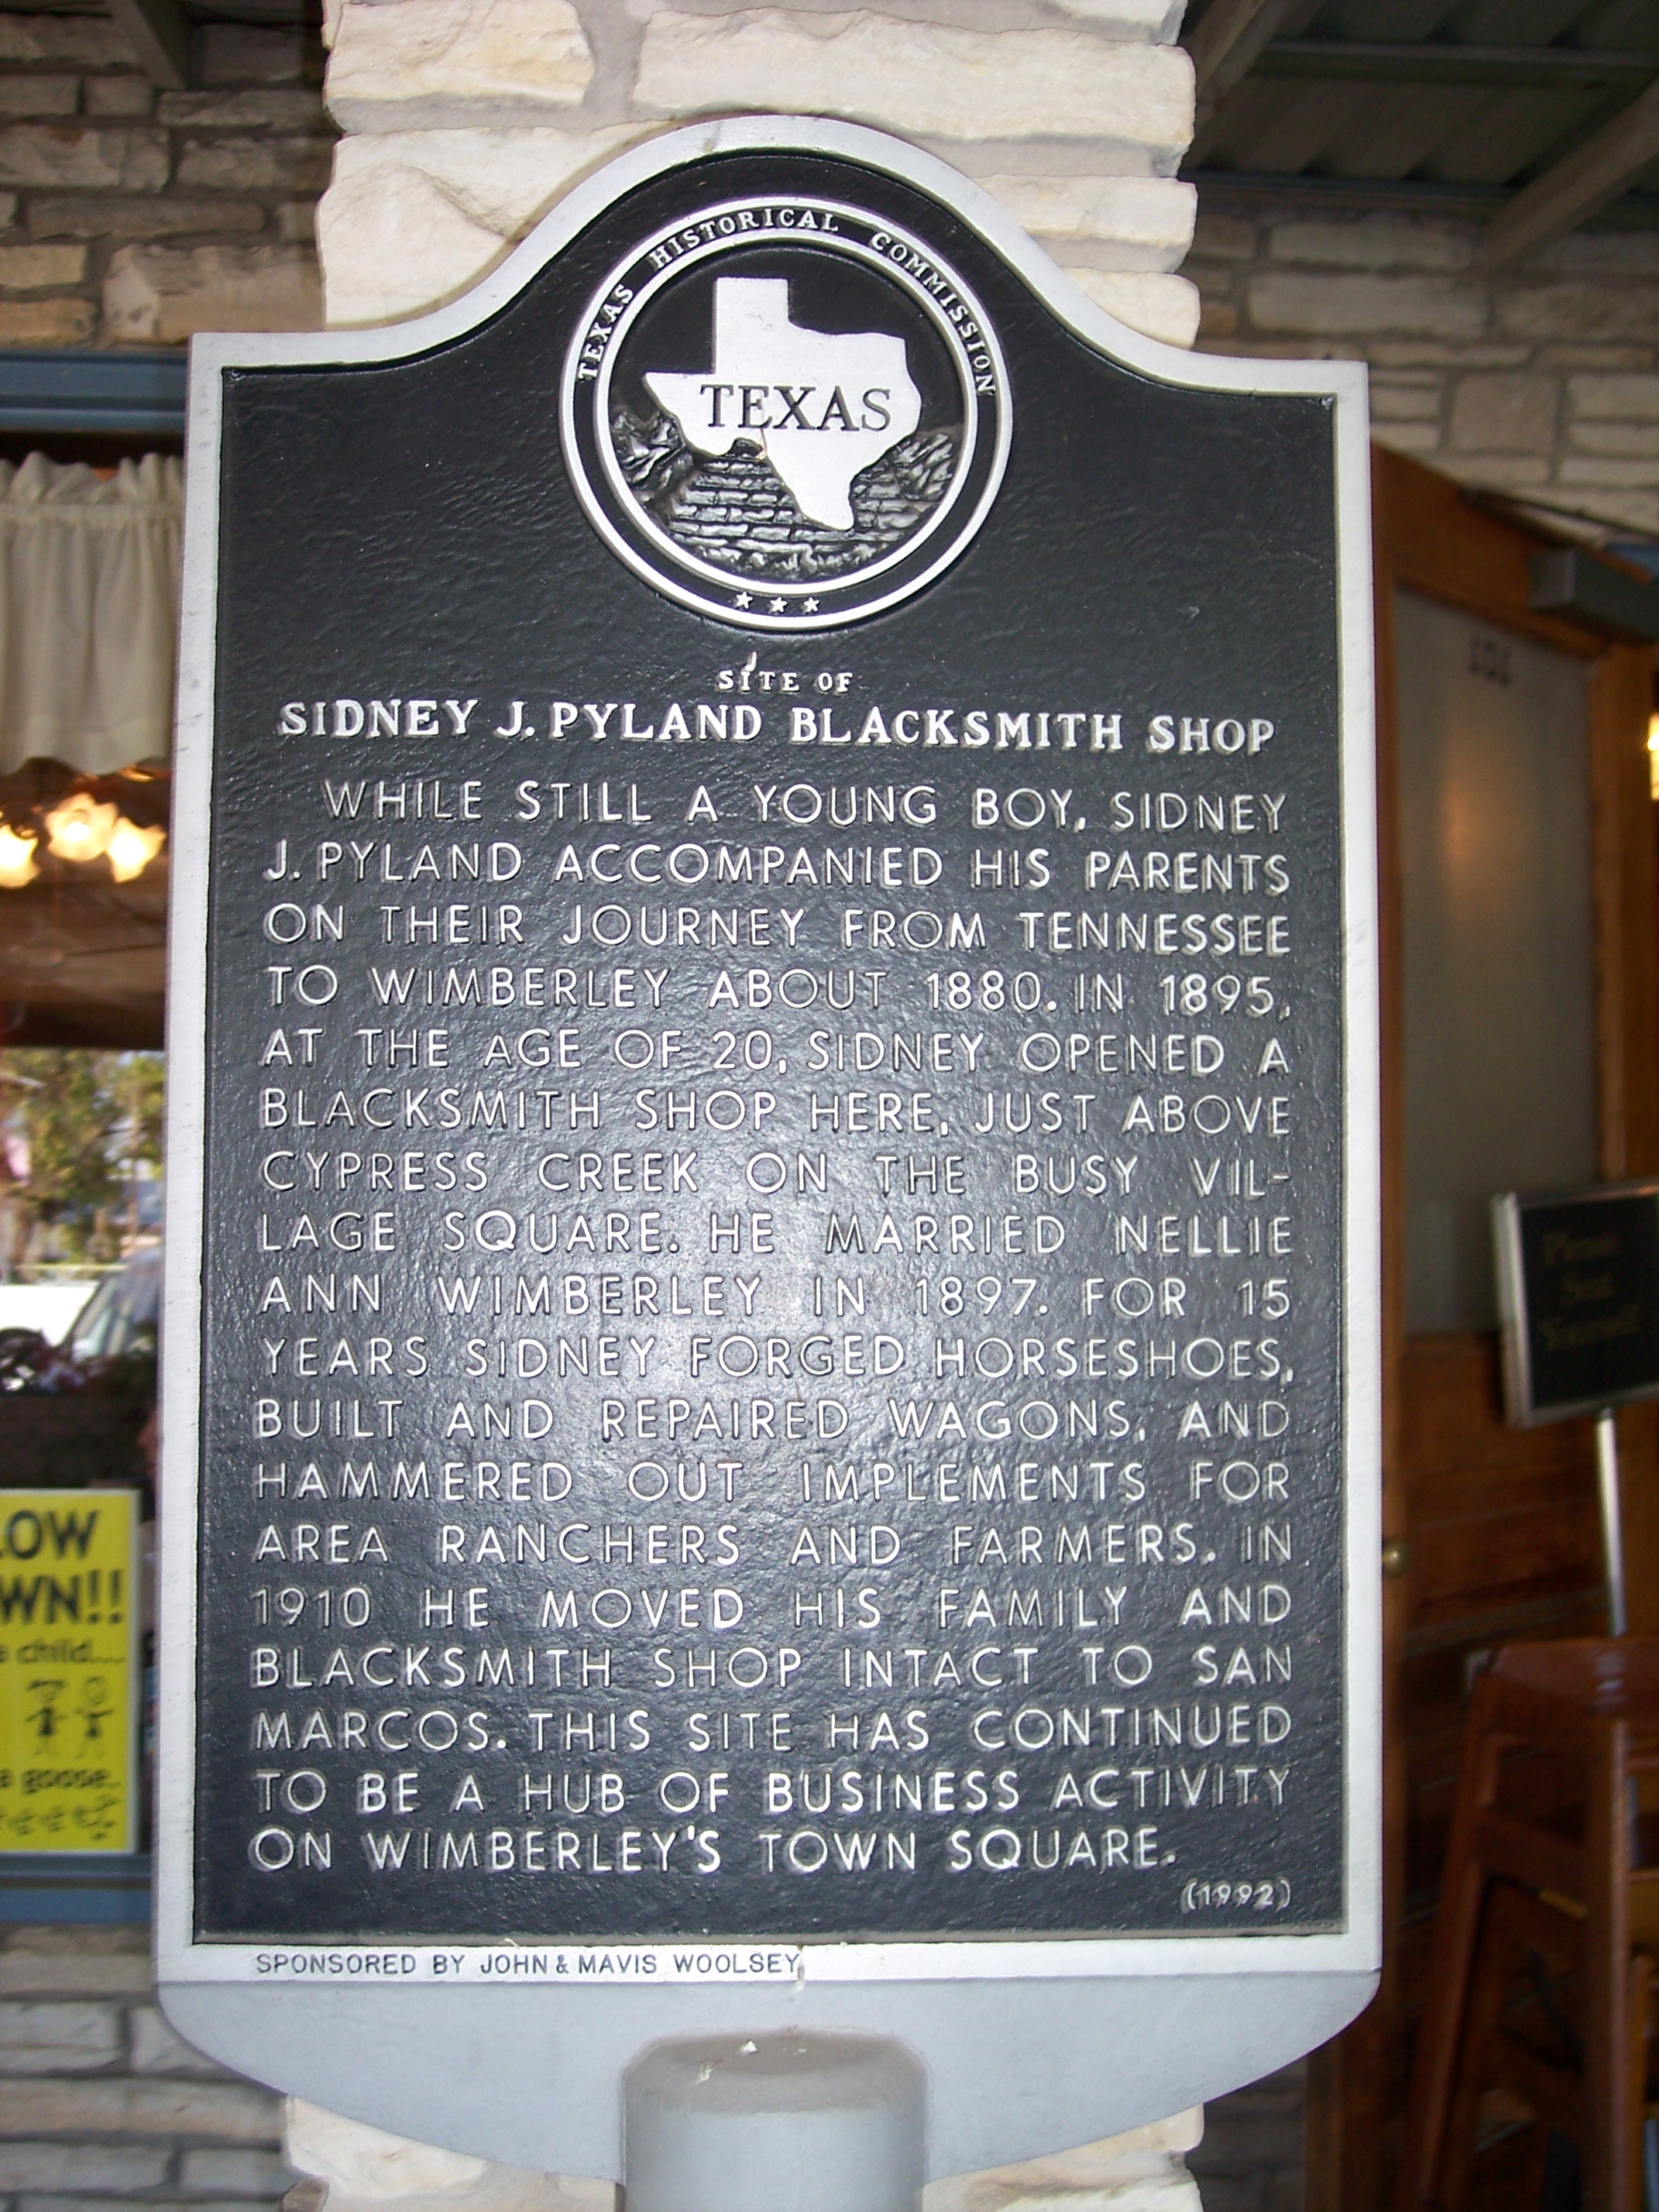  Historical Marker for the Wimberley Blacksmith Shop 2006